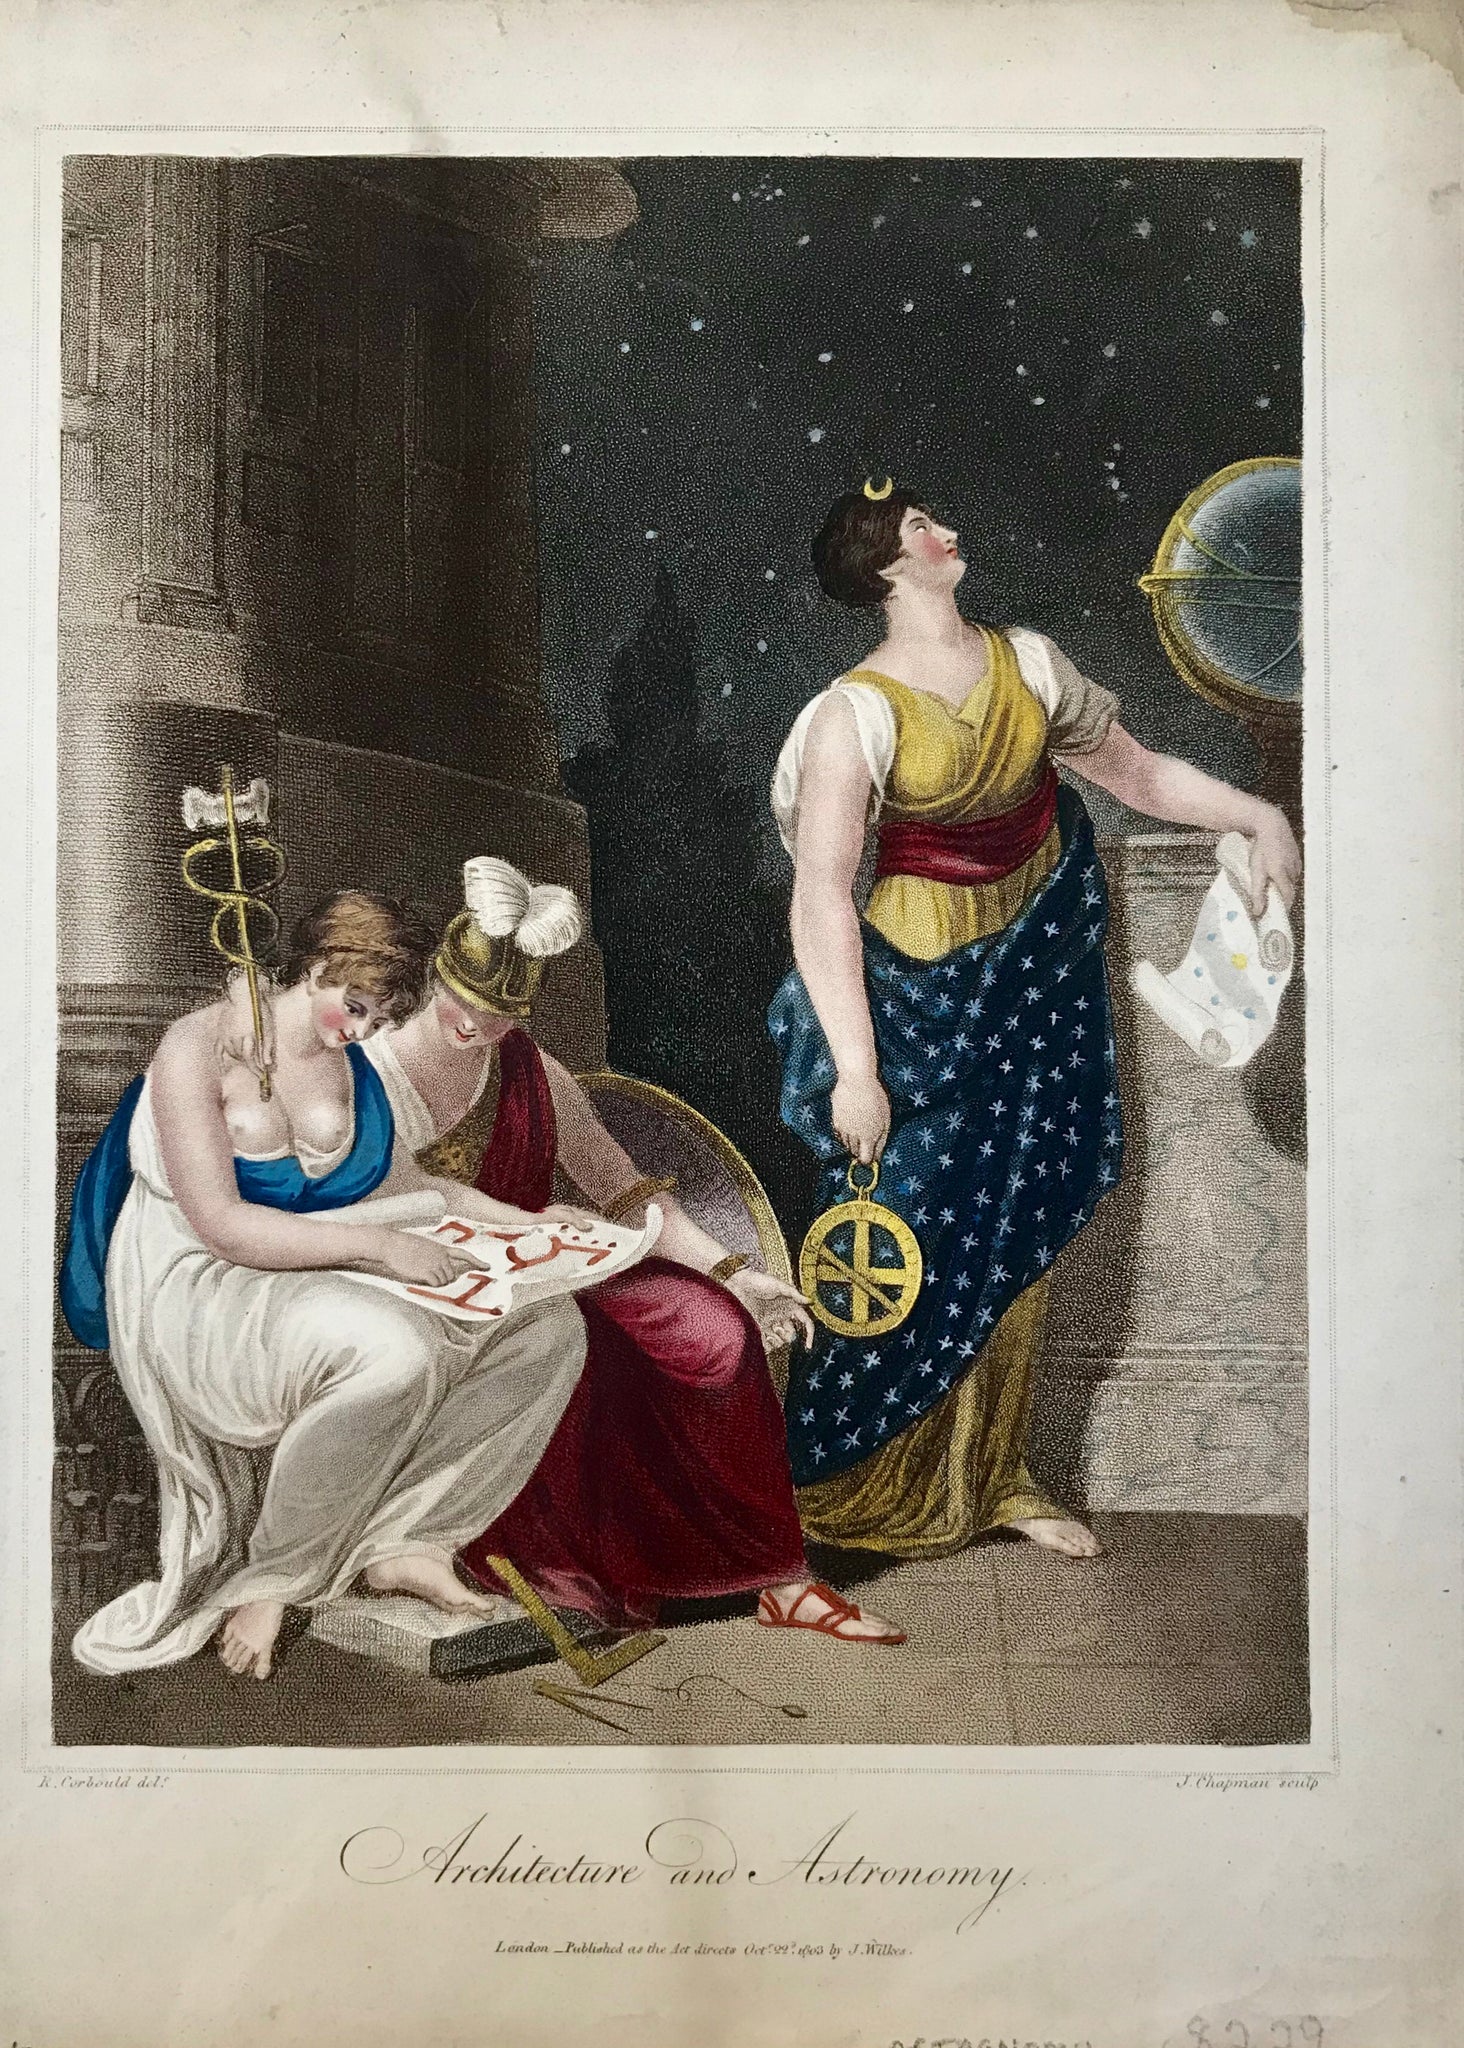 Architecture and Astronomy  Stipple engraving by S. Chapman after R. Corbould, dated 1803. Original hand coloring.